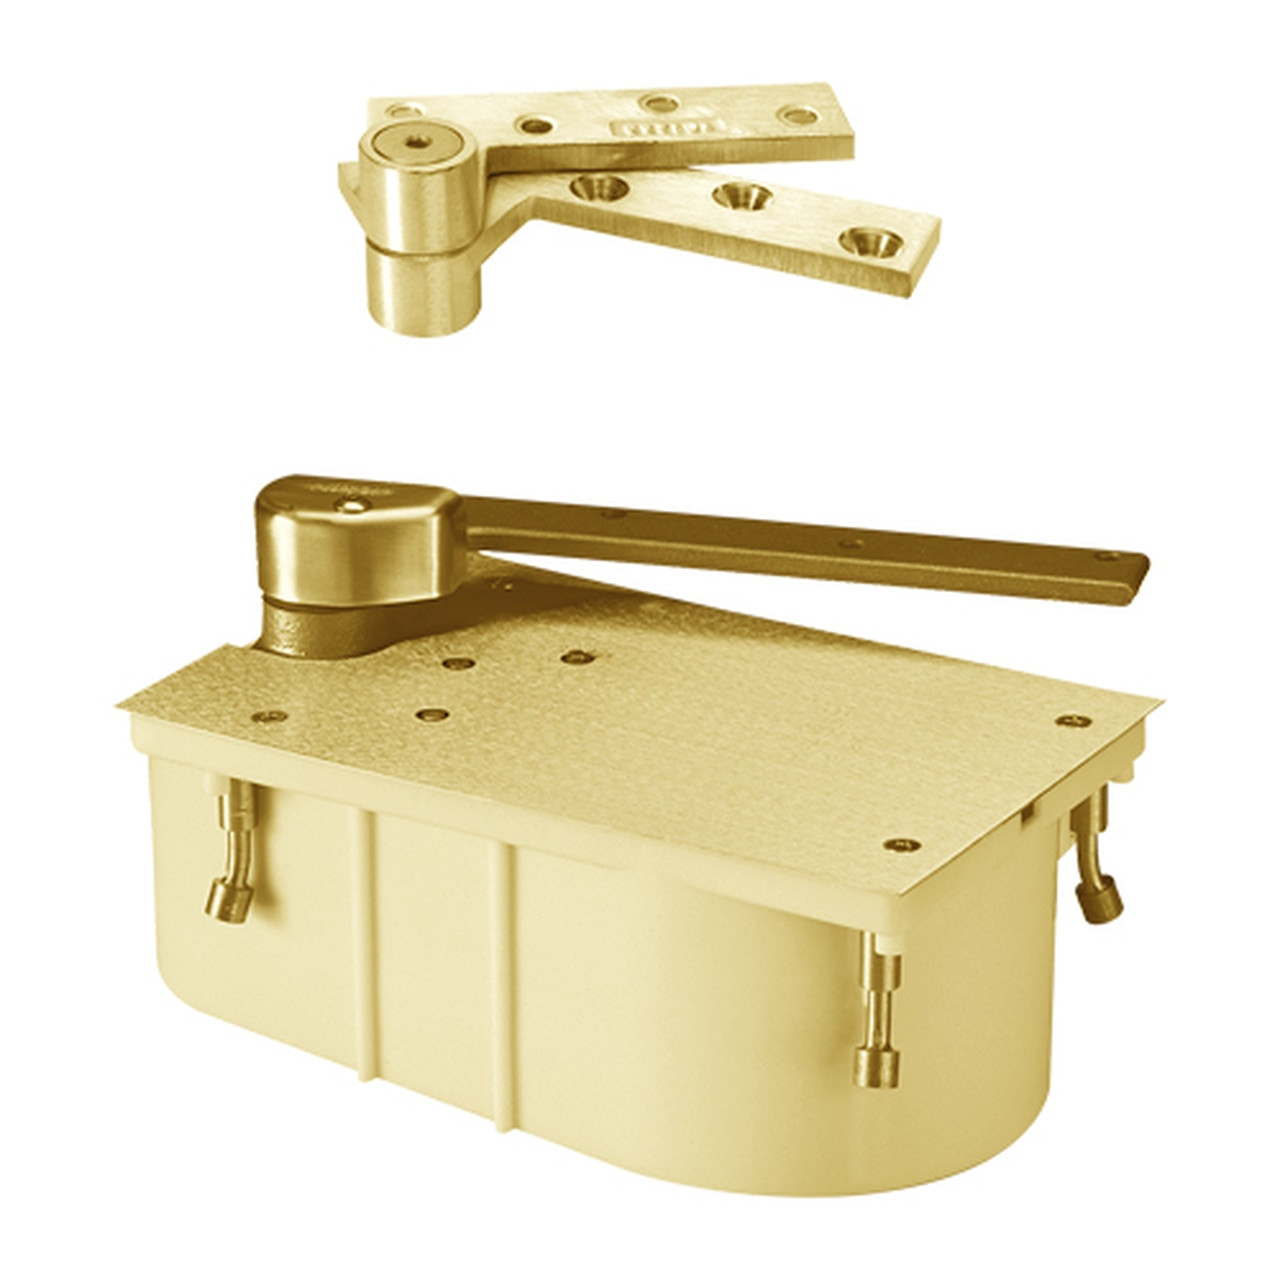 F27-105N-1-1-2OS-LTP-RH-605 Rixson 27 Series Fire Rated Heavy Duty 1-1/2" Offset Hung Floor Closer in Bright Brass Finish